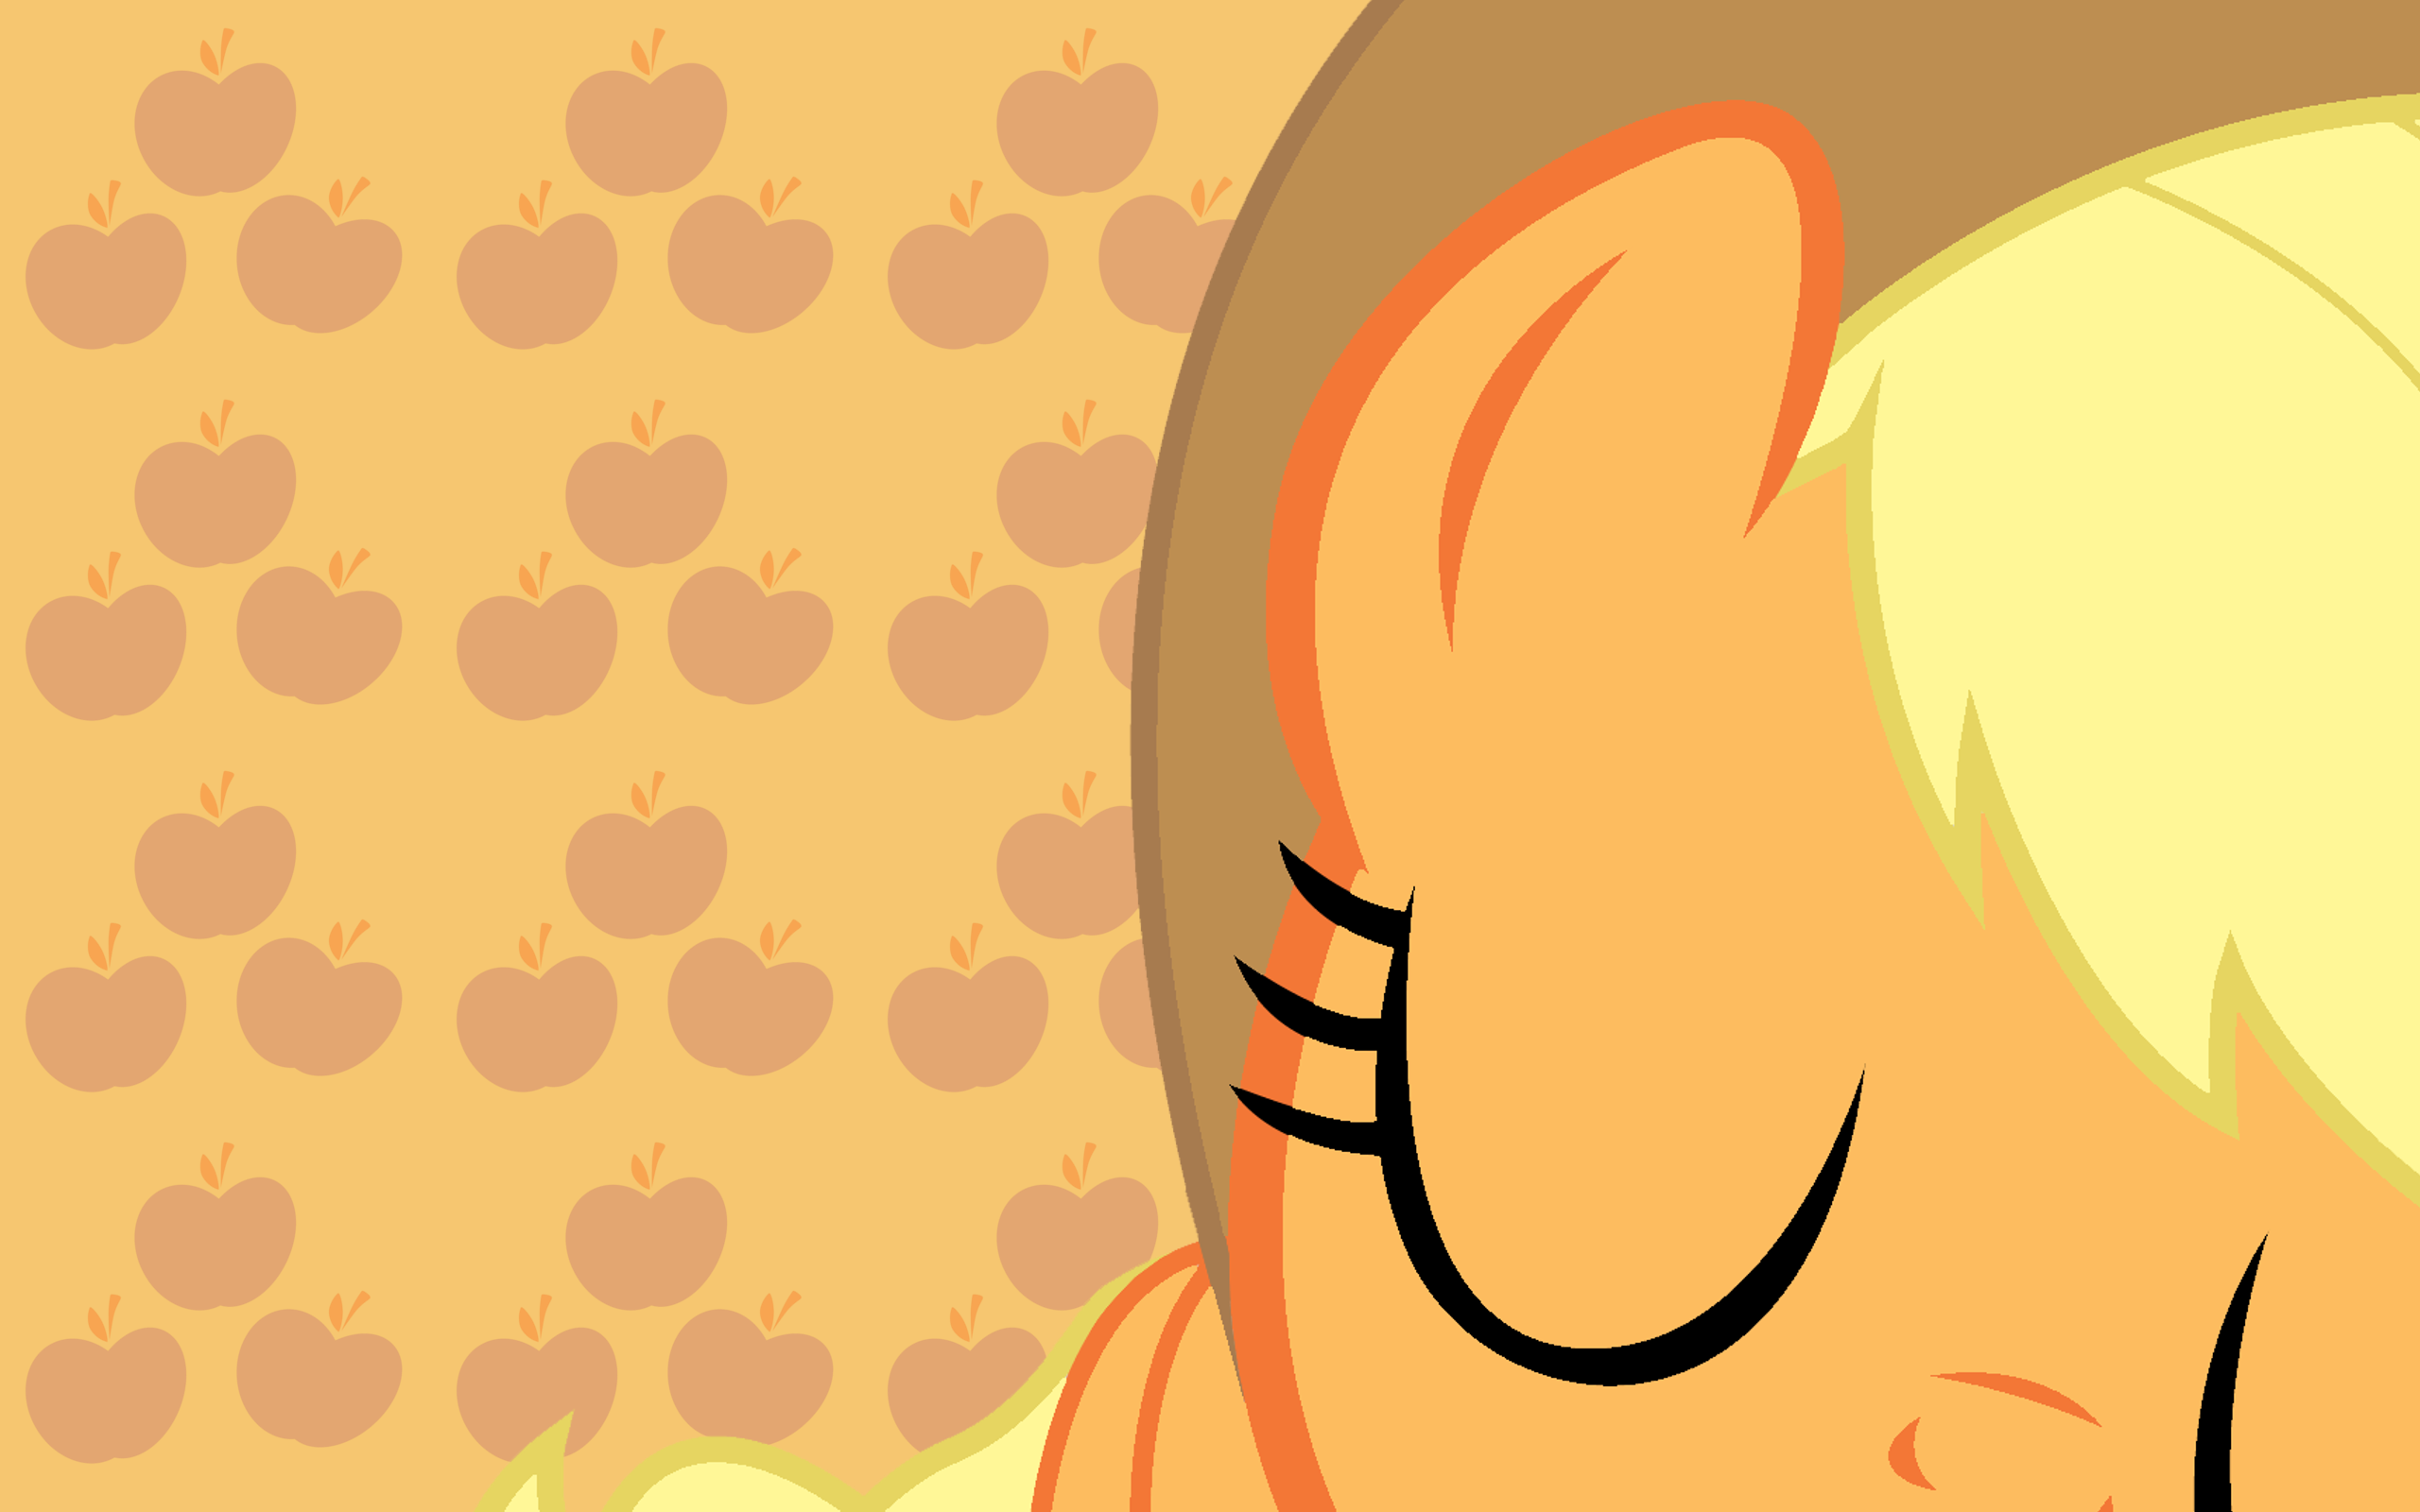 Be My Special Some pony AJ WP by AliceHumanSacrifice0, ooklah and ShadyHorseman